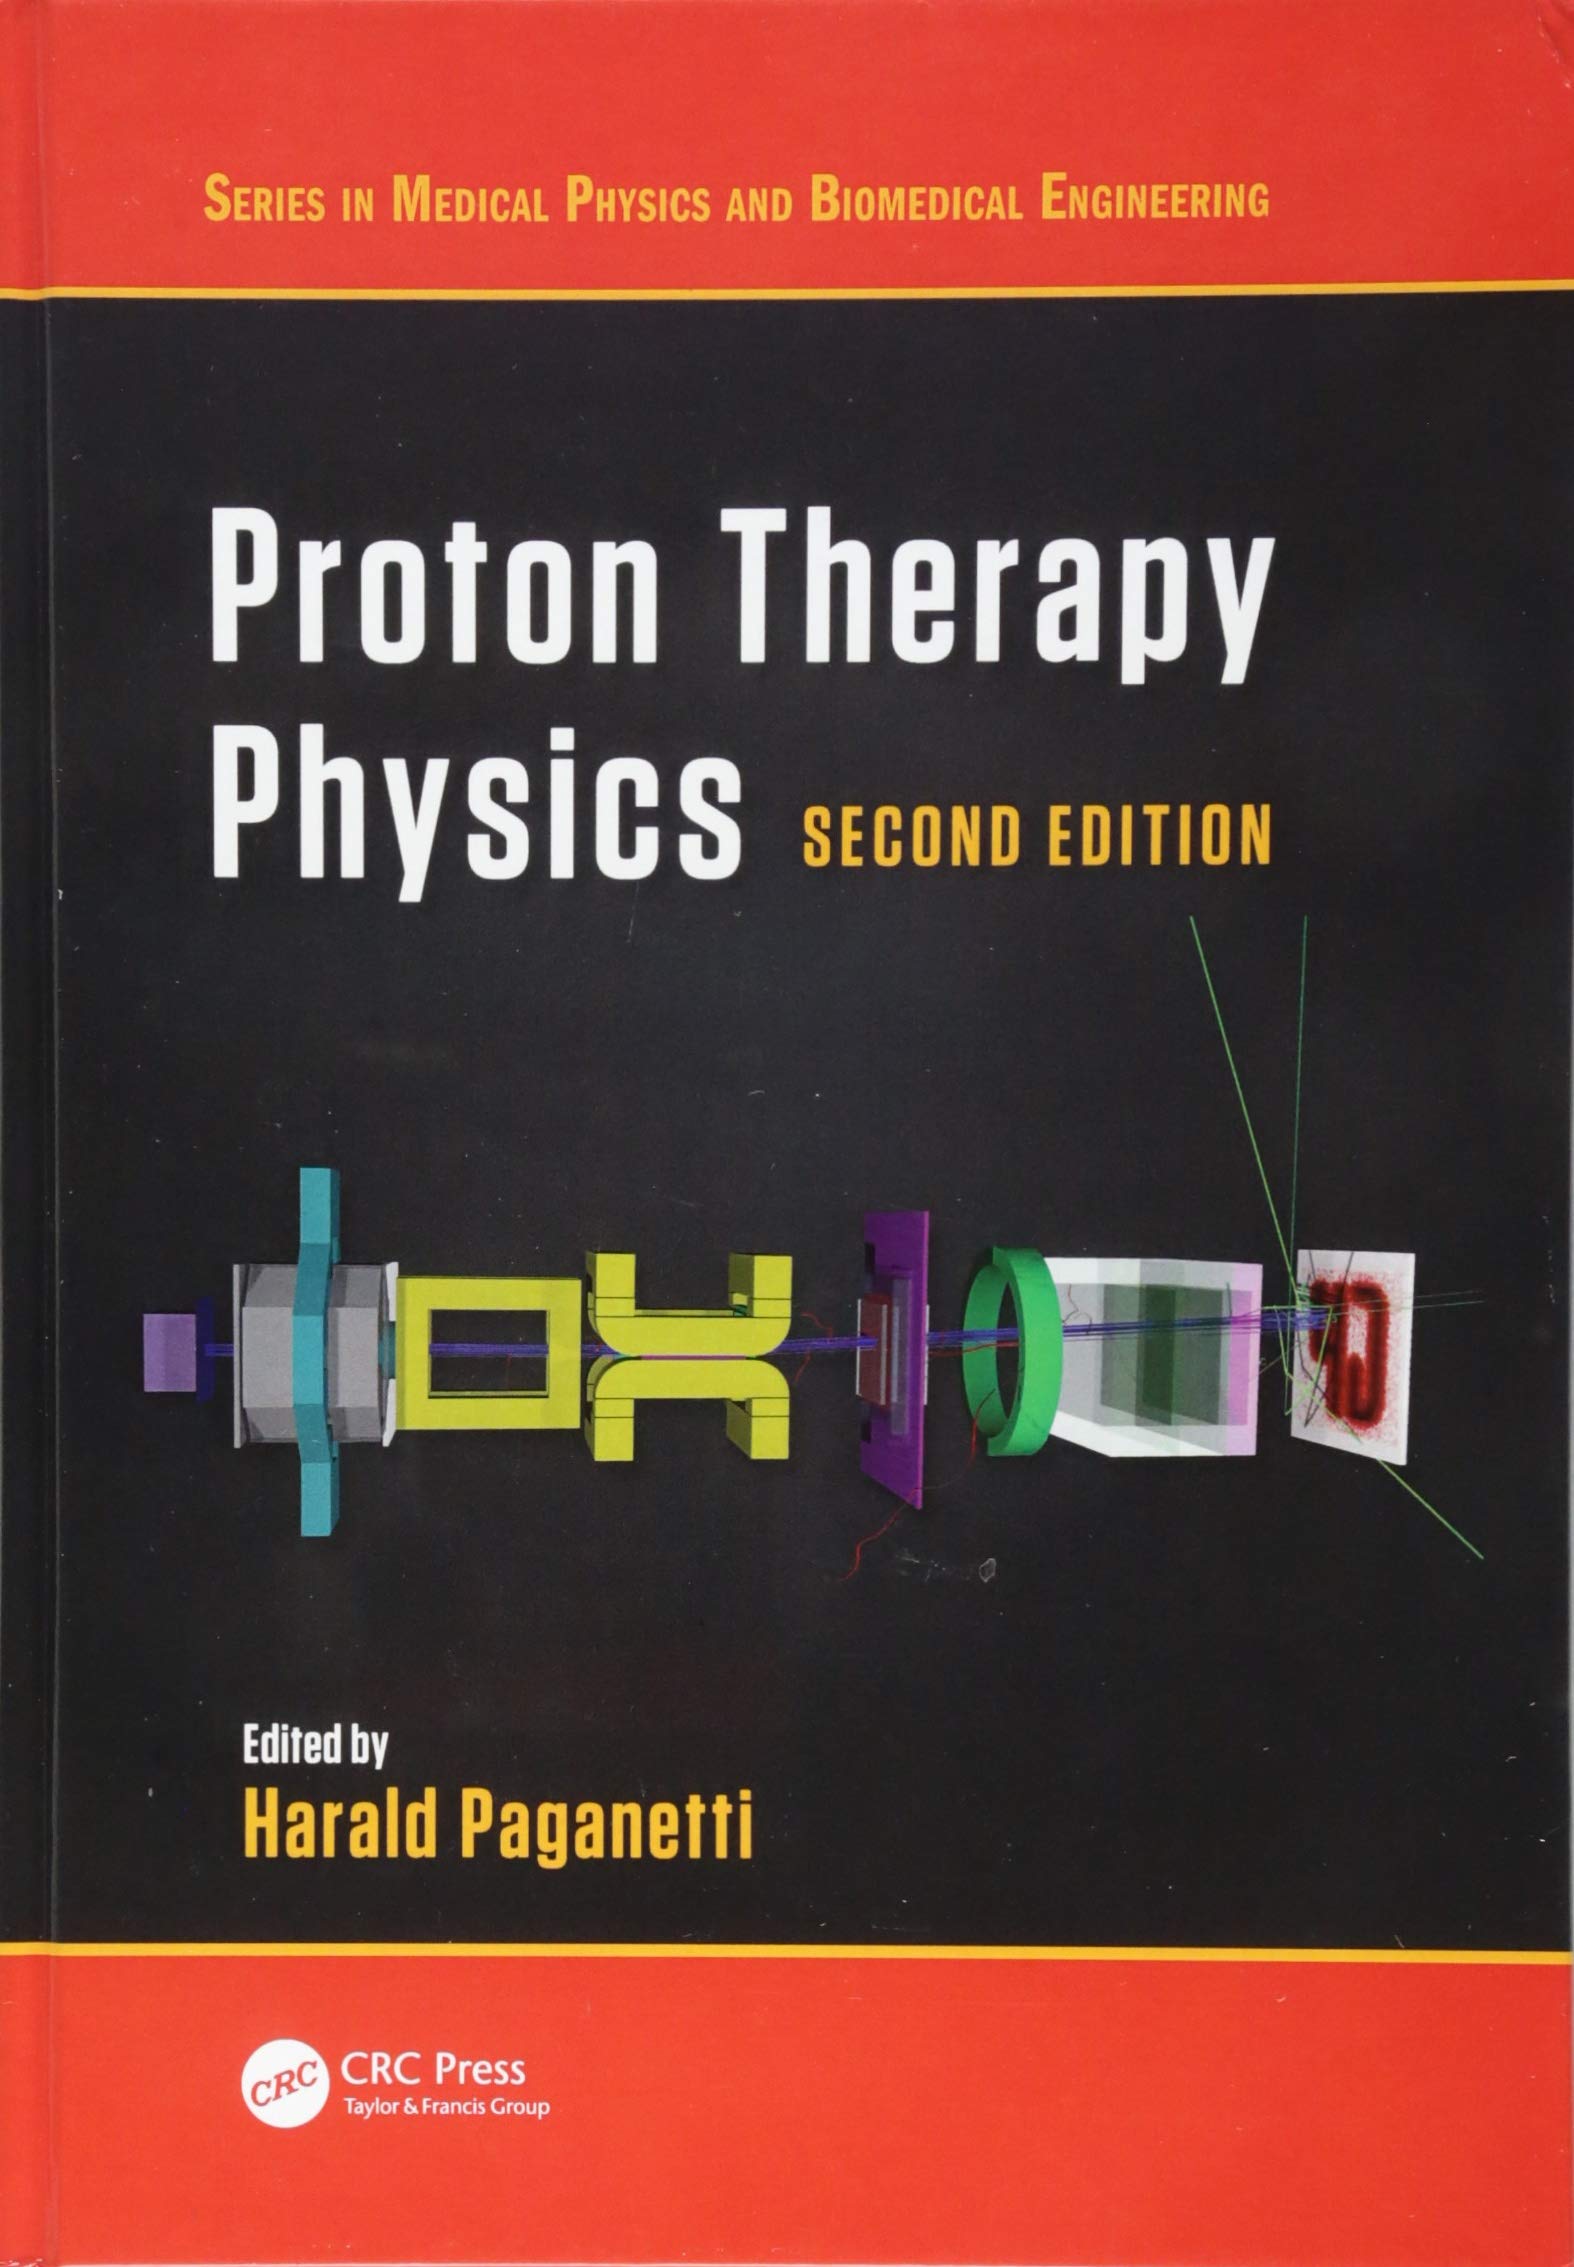 Proton Therapy Physics, Second Edition (Series in Medical Physics and Biomedical Engineering)